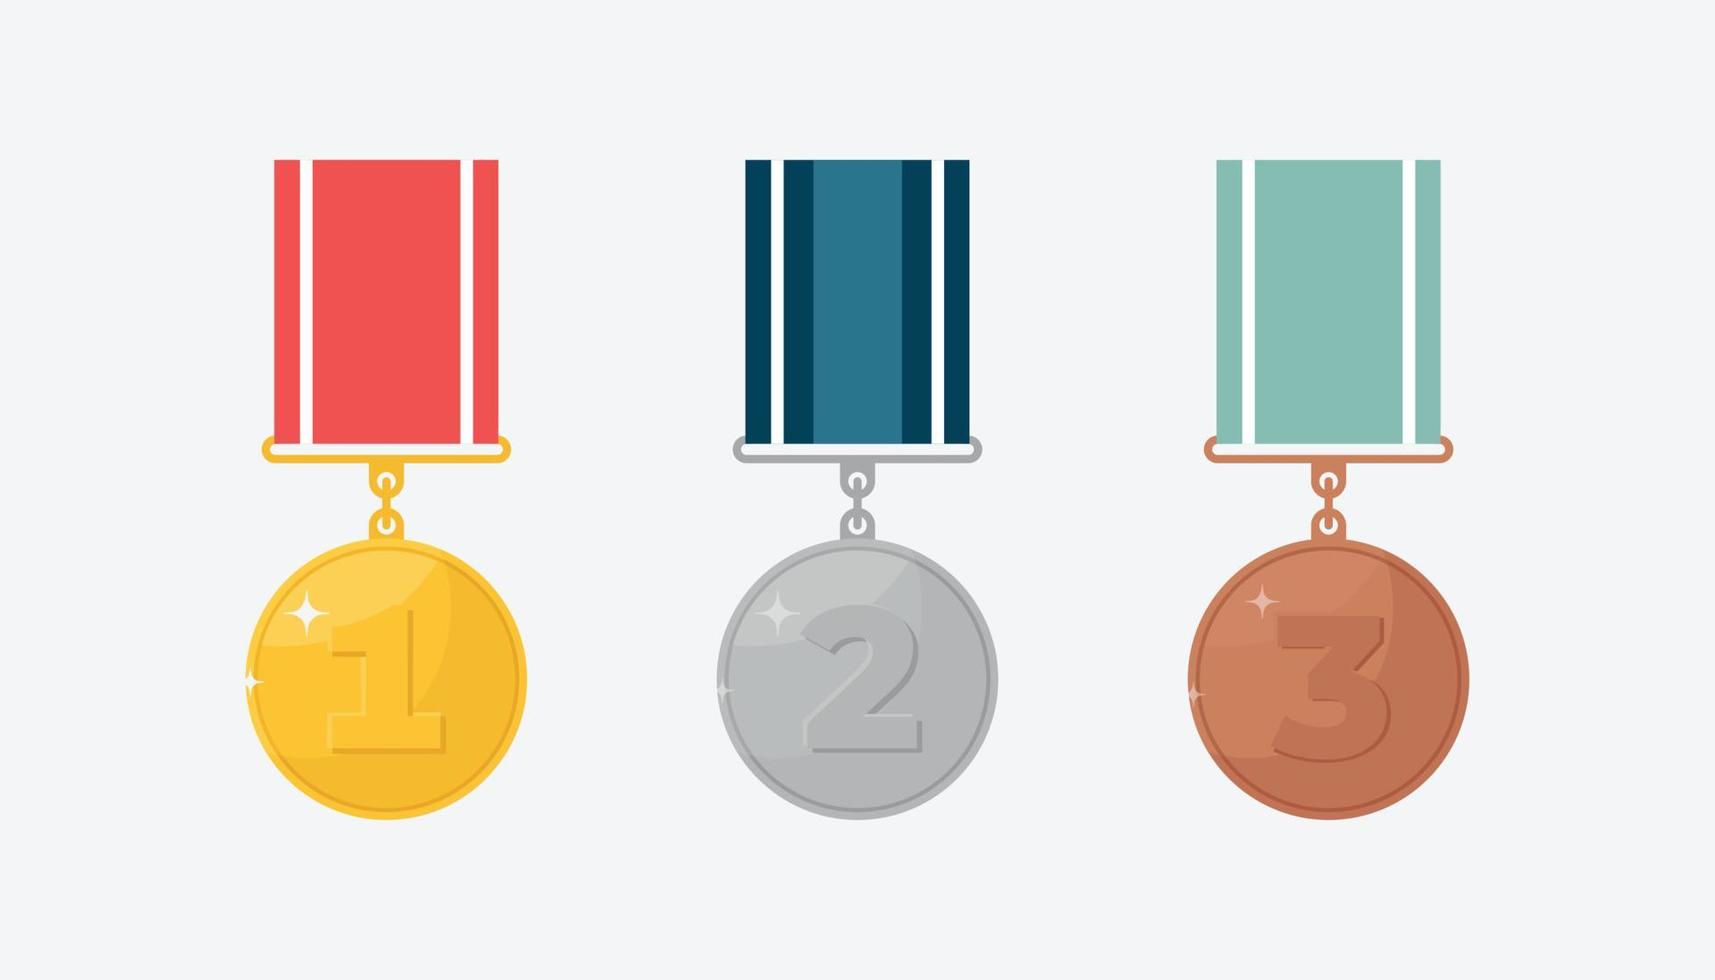 Set of gold, silver and bronze metal medals for first, second and third place prize. Champion award symbols, isolated on white background. Flat vector illustration